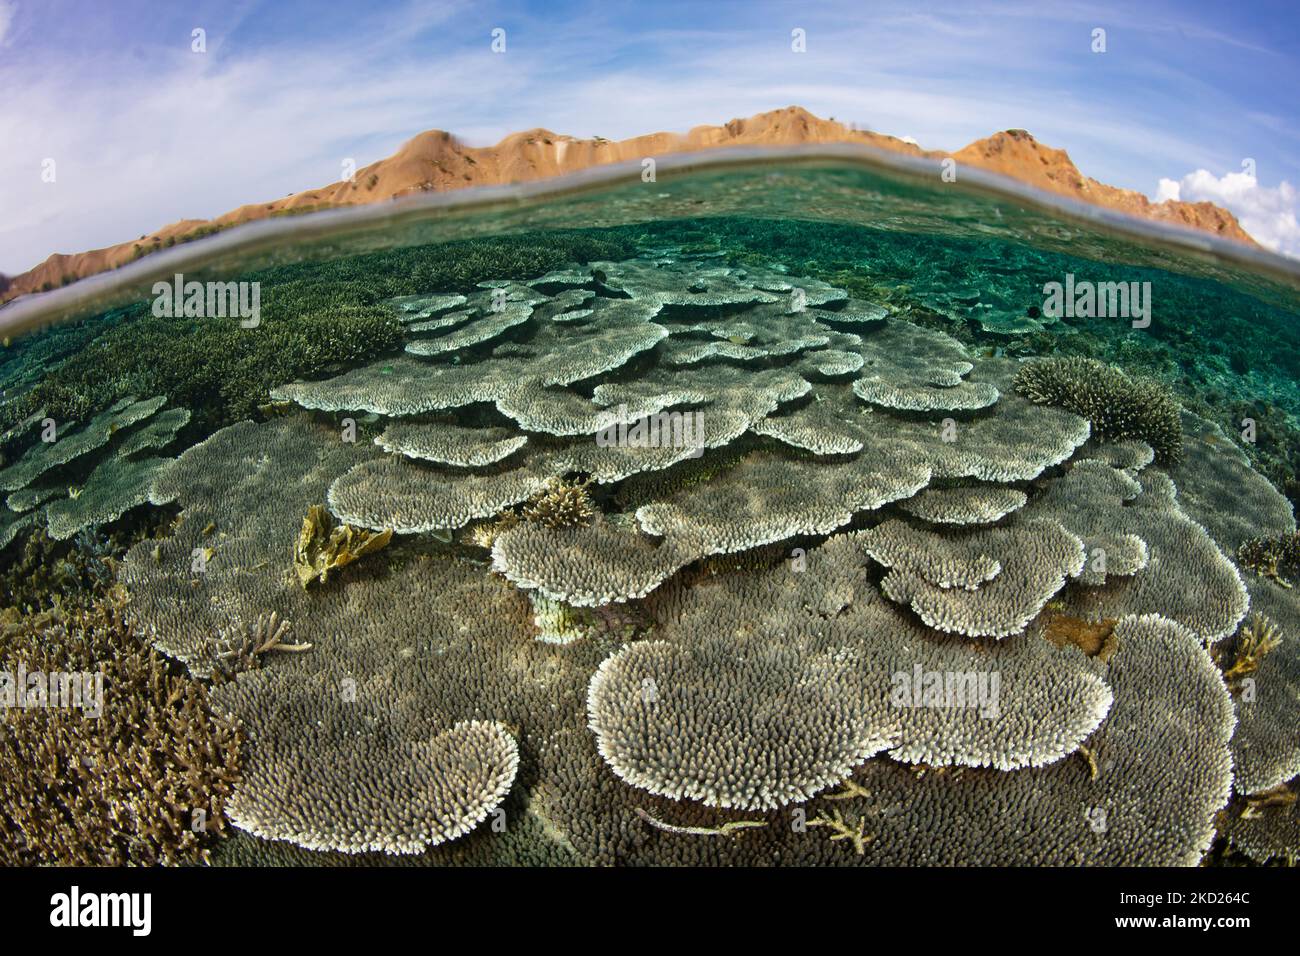 An array of reef-building corals compete for space on a shallow, healthy reef near Komodo, Indonesia. This area as extremely high marine biodiversity. Stock Photo